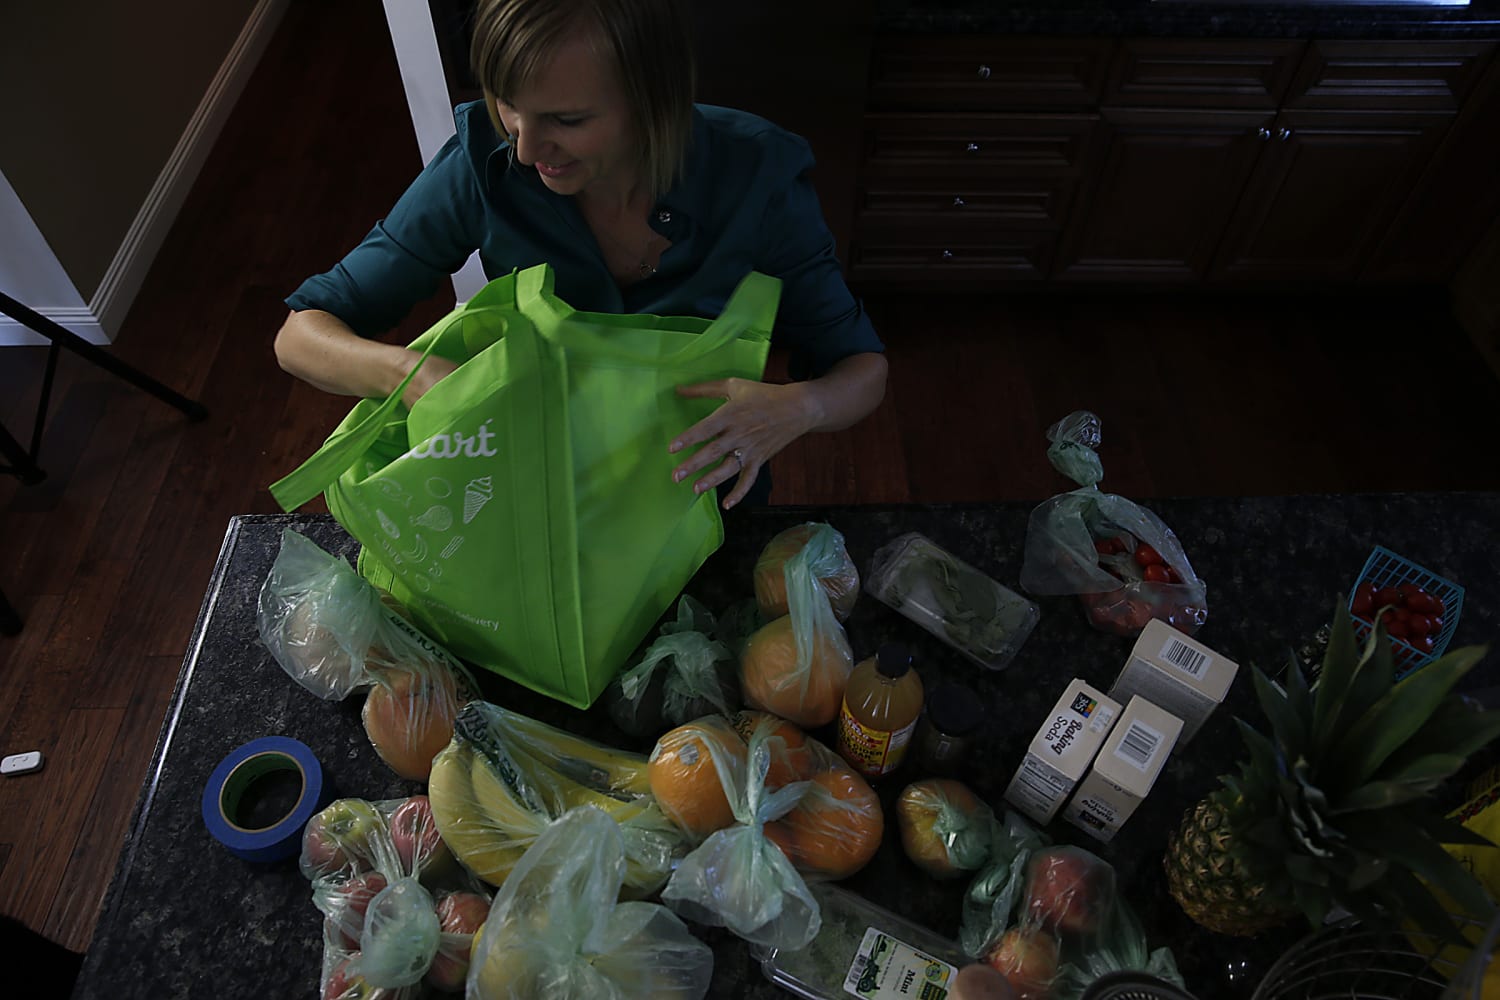 Instacart Workers Say Delivery Service Has Cut Yet Another Wage of Theirs